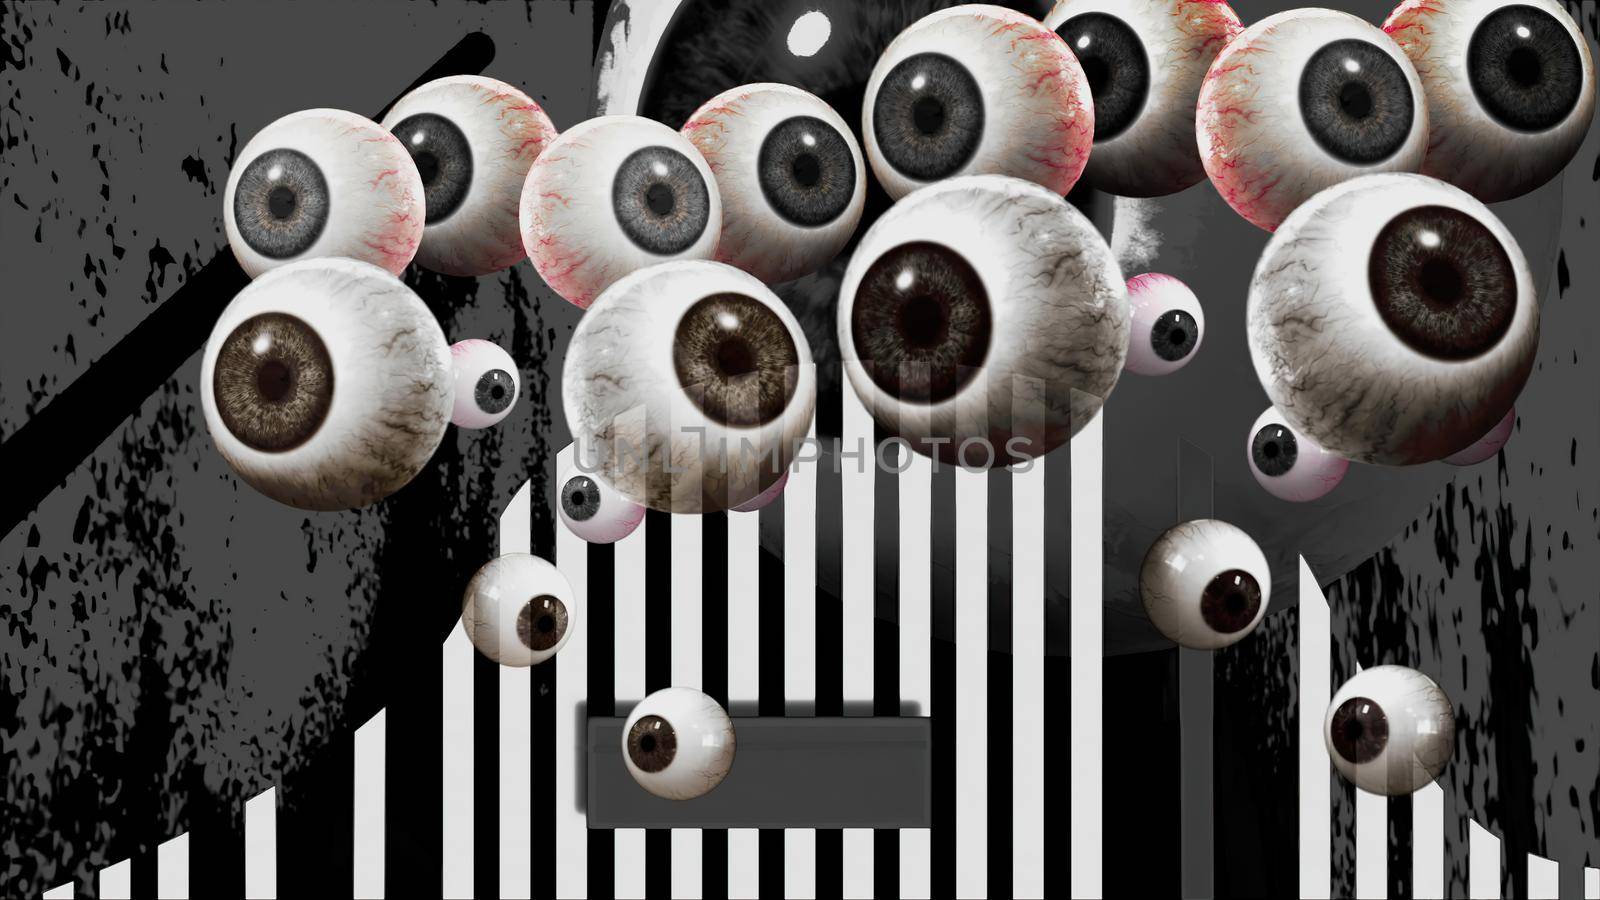 3d illustration - Eyes Ball on abstract backround